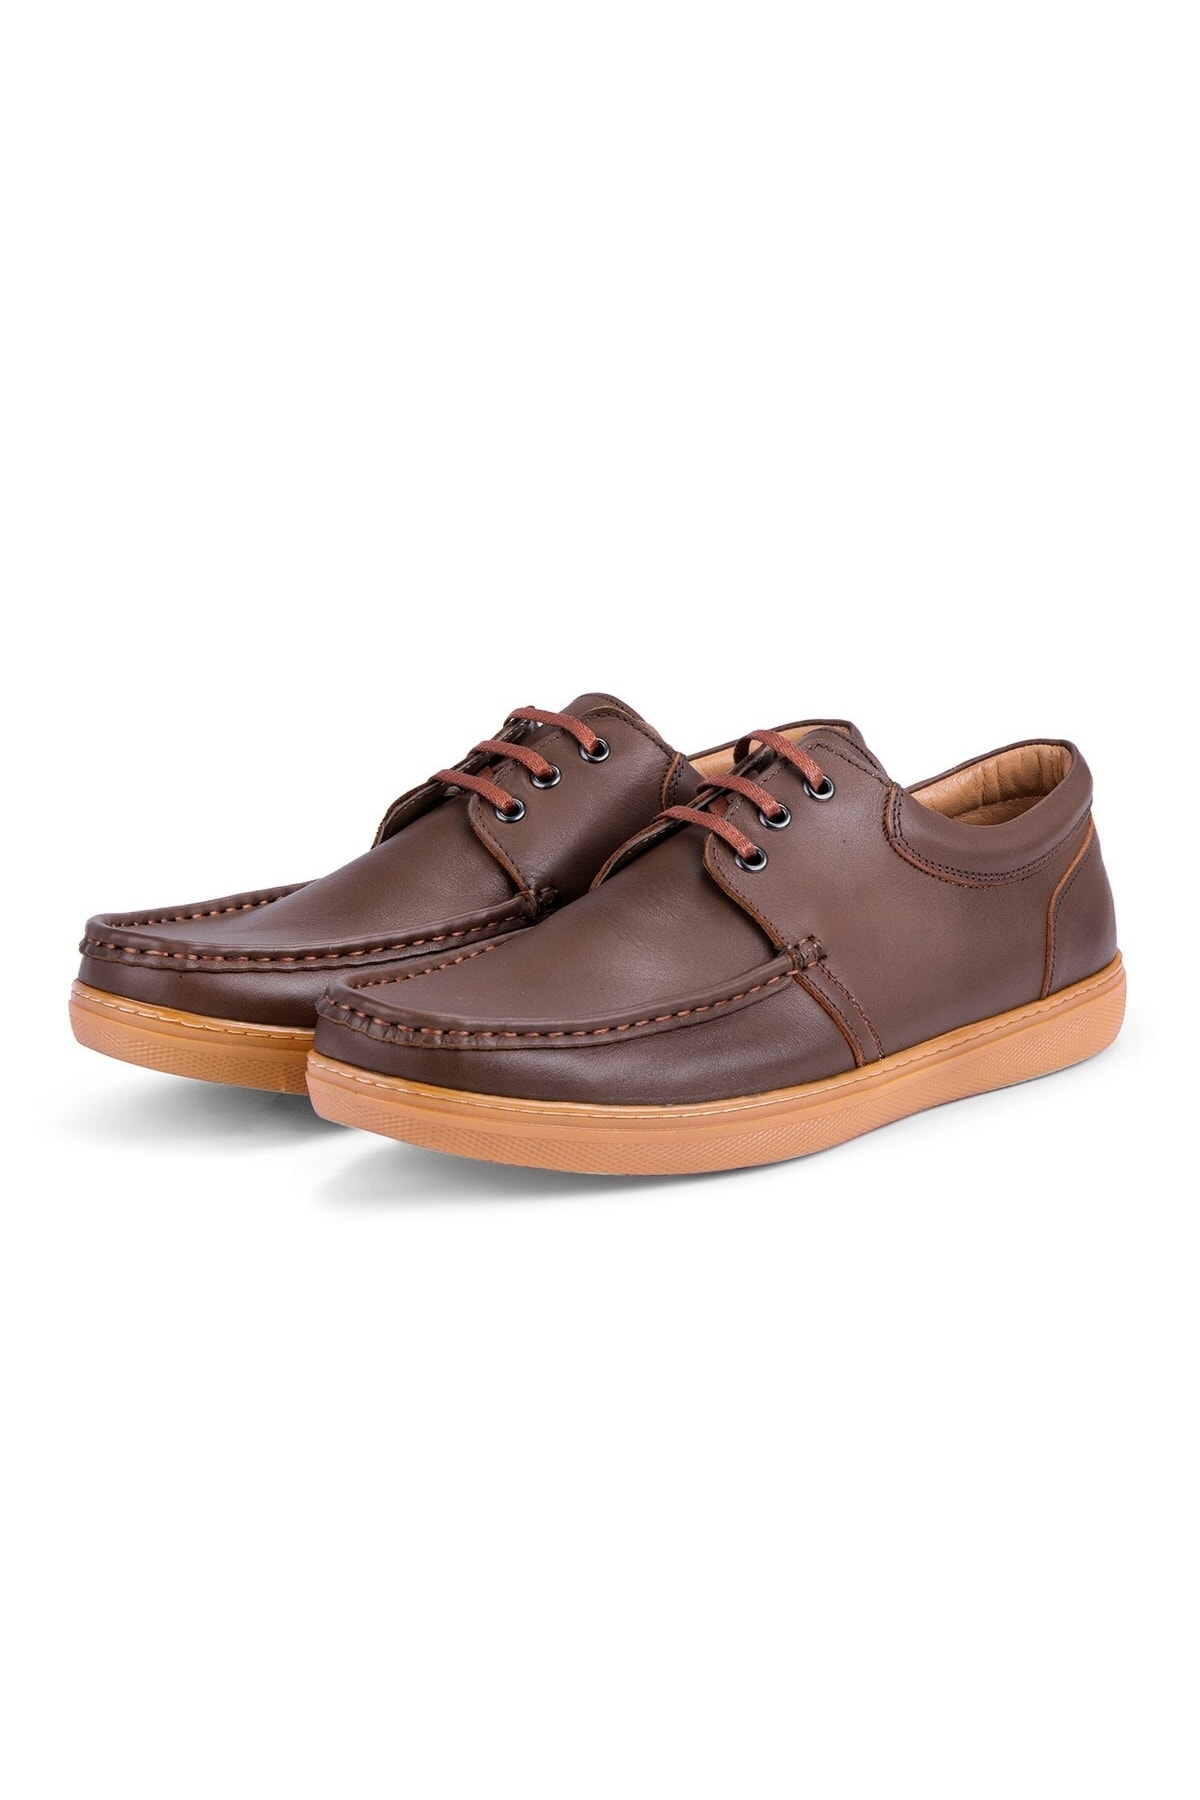 Levně Ducavelli Jazzy Genuine Leather Men's Casual Shoes Brown